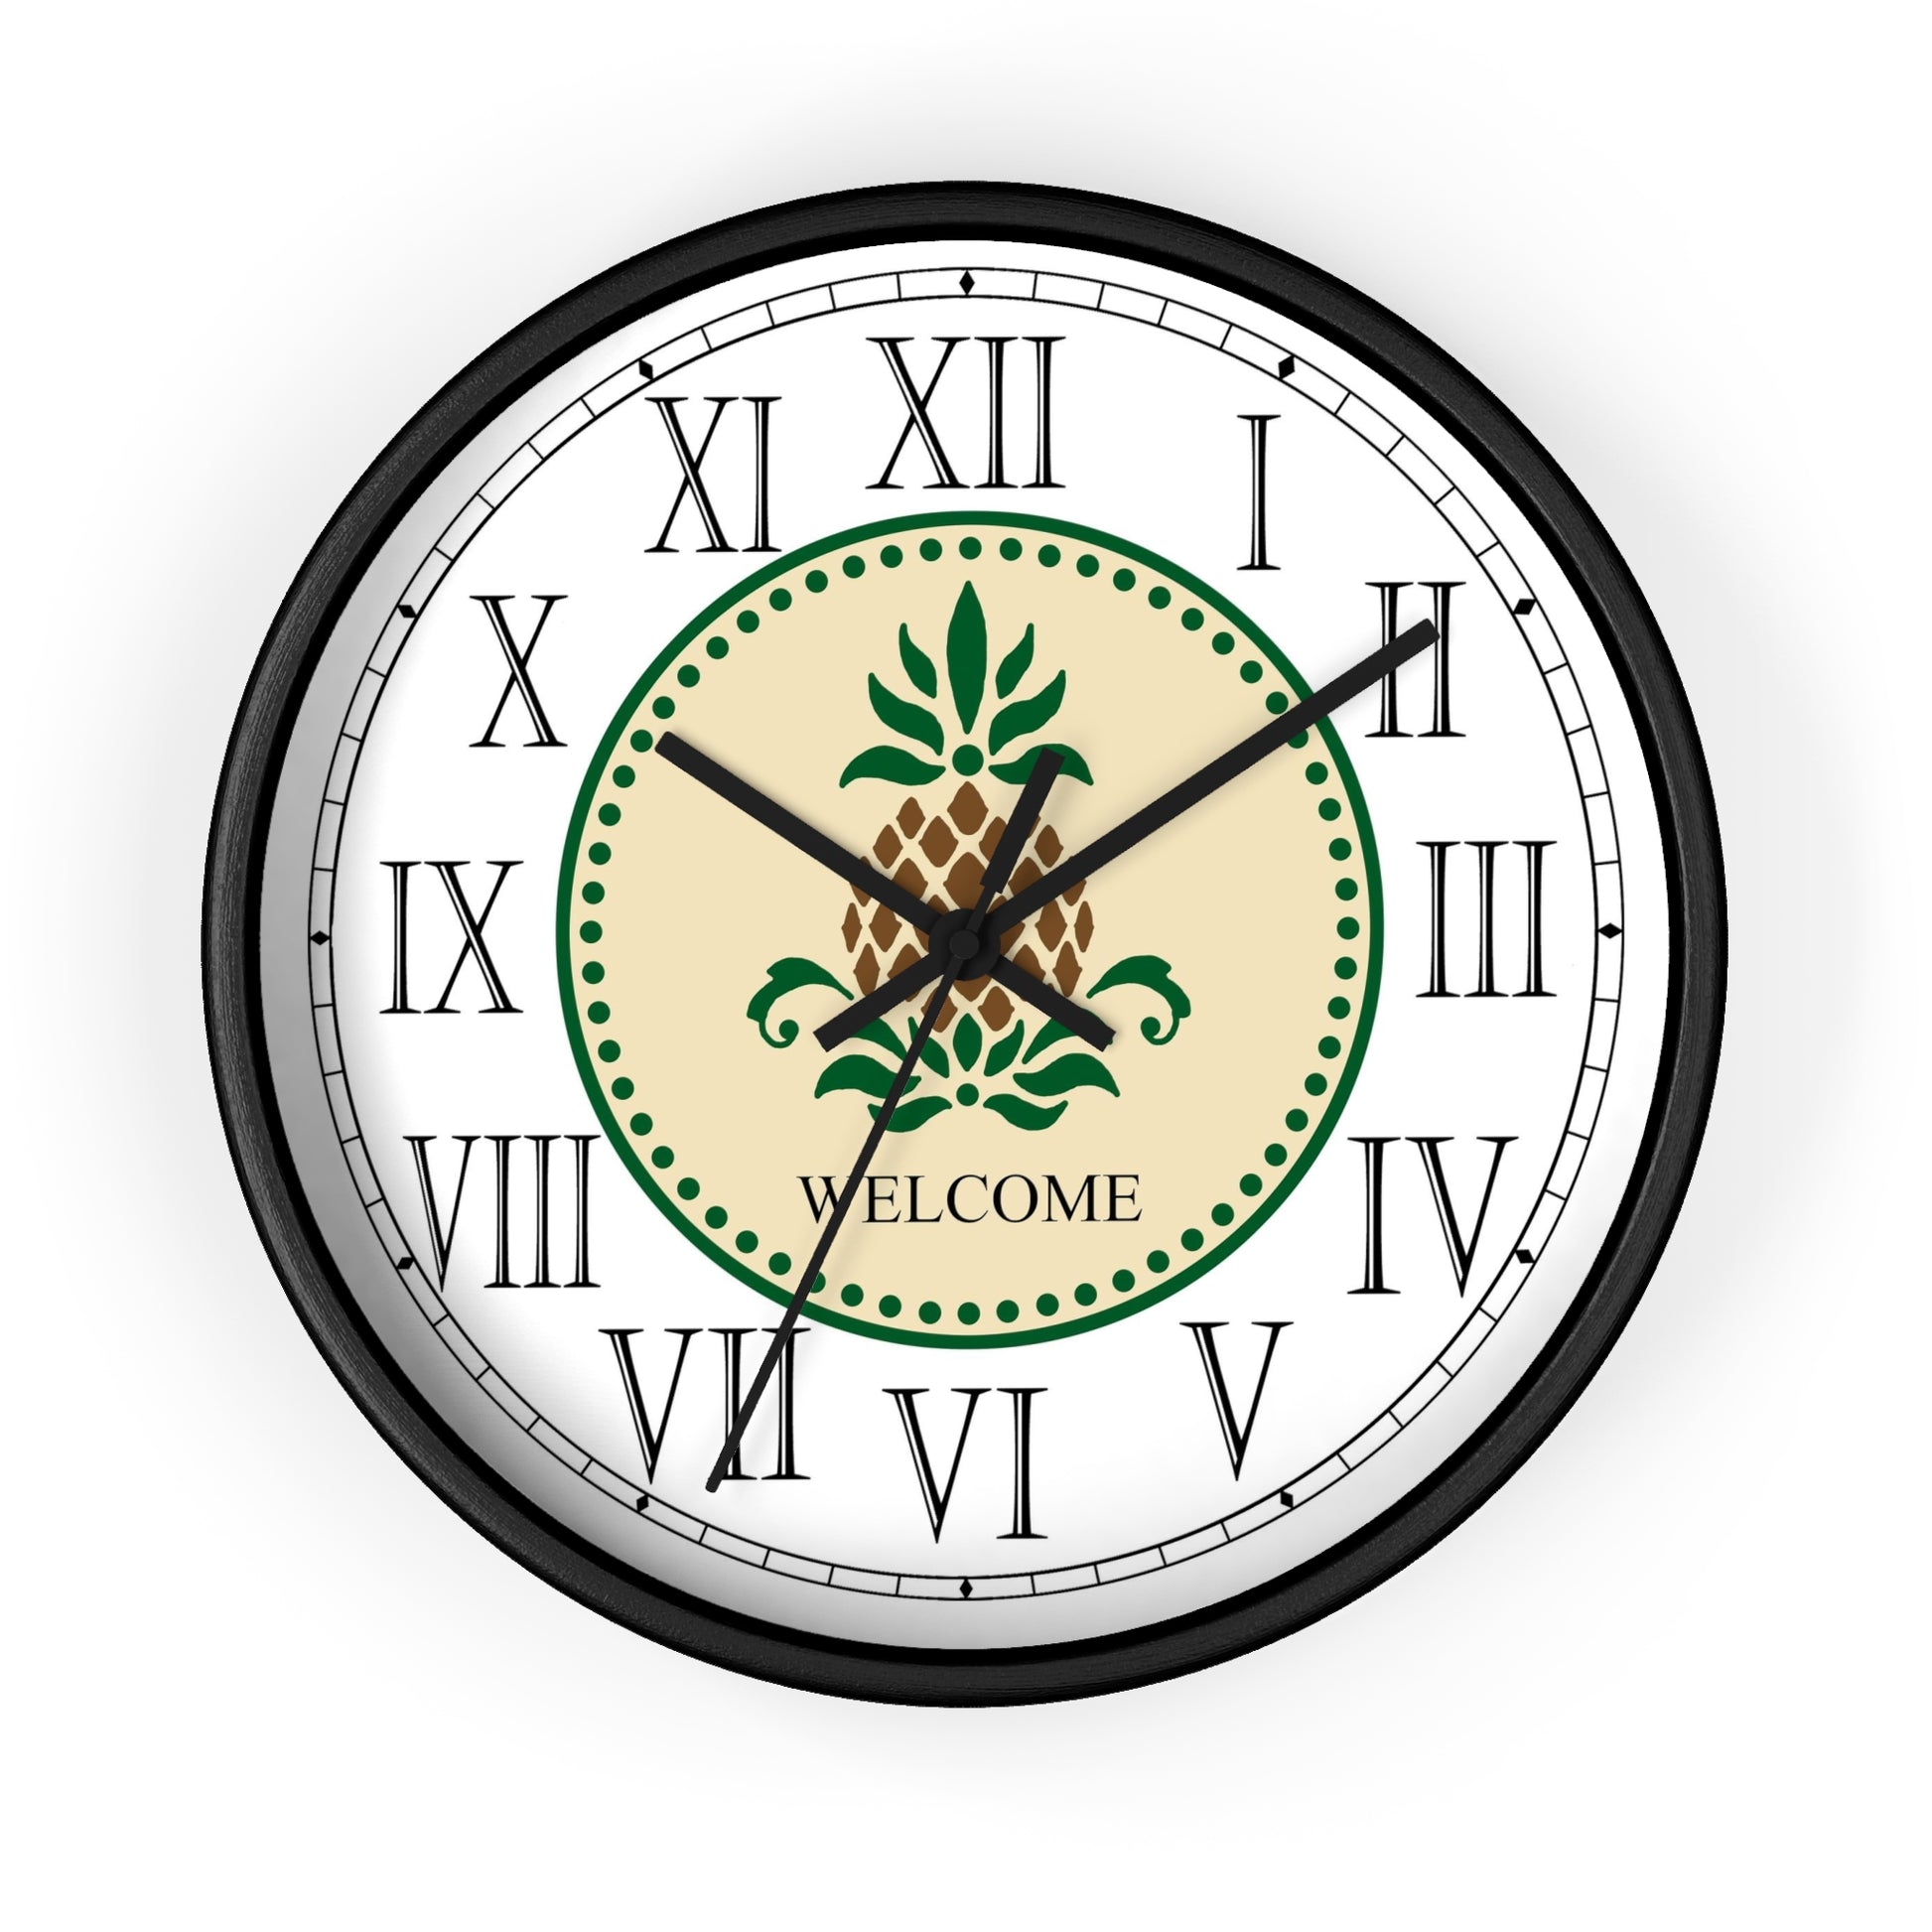 The WelcomeFolk Art Design Roman Numeral Clock will add an exciting and practical accent to any room. This charming clock features Roman Numerals and will serve as a statement piece and create a personalized environment in your room. The pineapple has long been a symbol of welcome and hospitality. The Welcome Folk Art Design is a reproduction of a fine art design by Lee M. Buchanan.